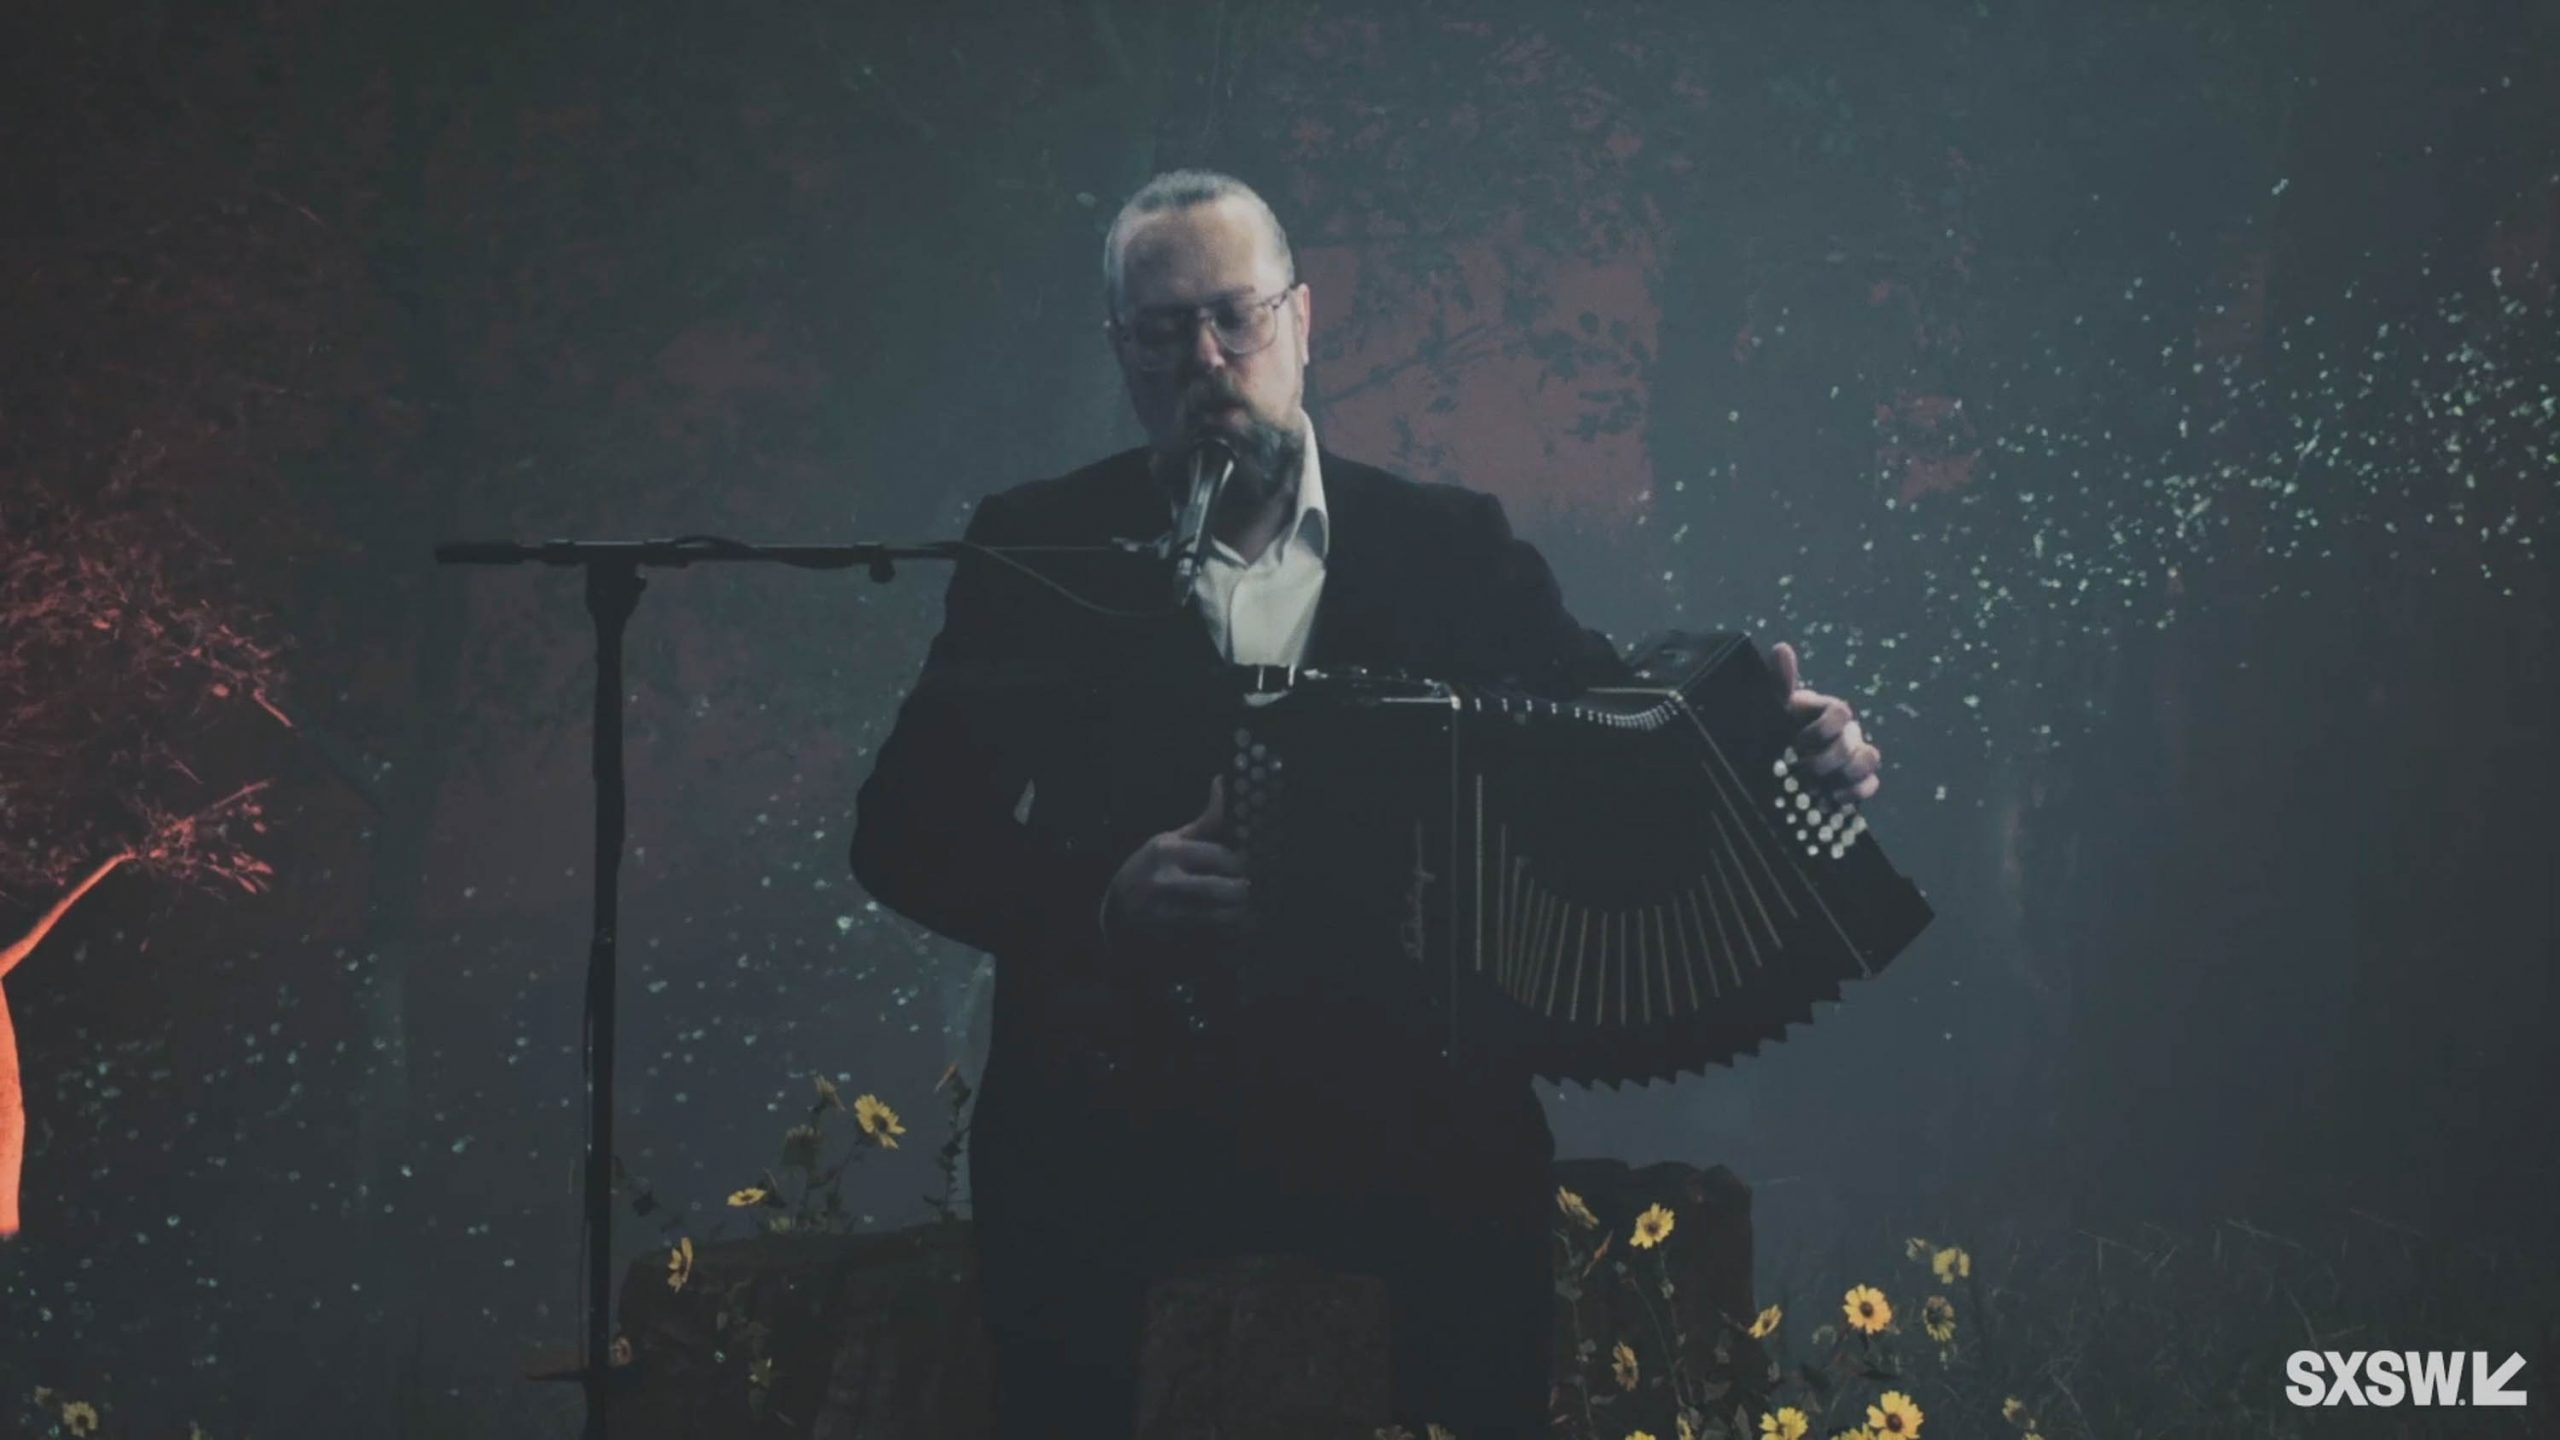 Antti Paalanen performs at the SXSW Music Festival showcase presented by Genelec & Music Finland during SXSW Online on March 19, 2021.